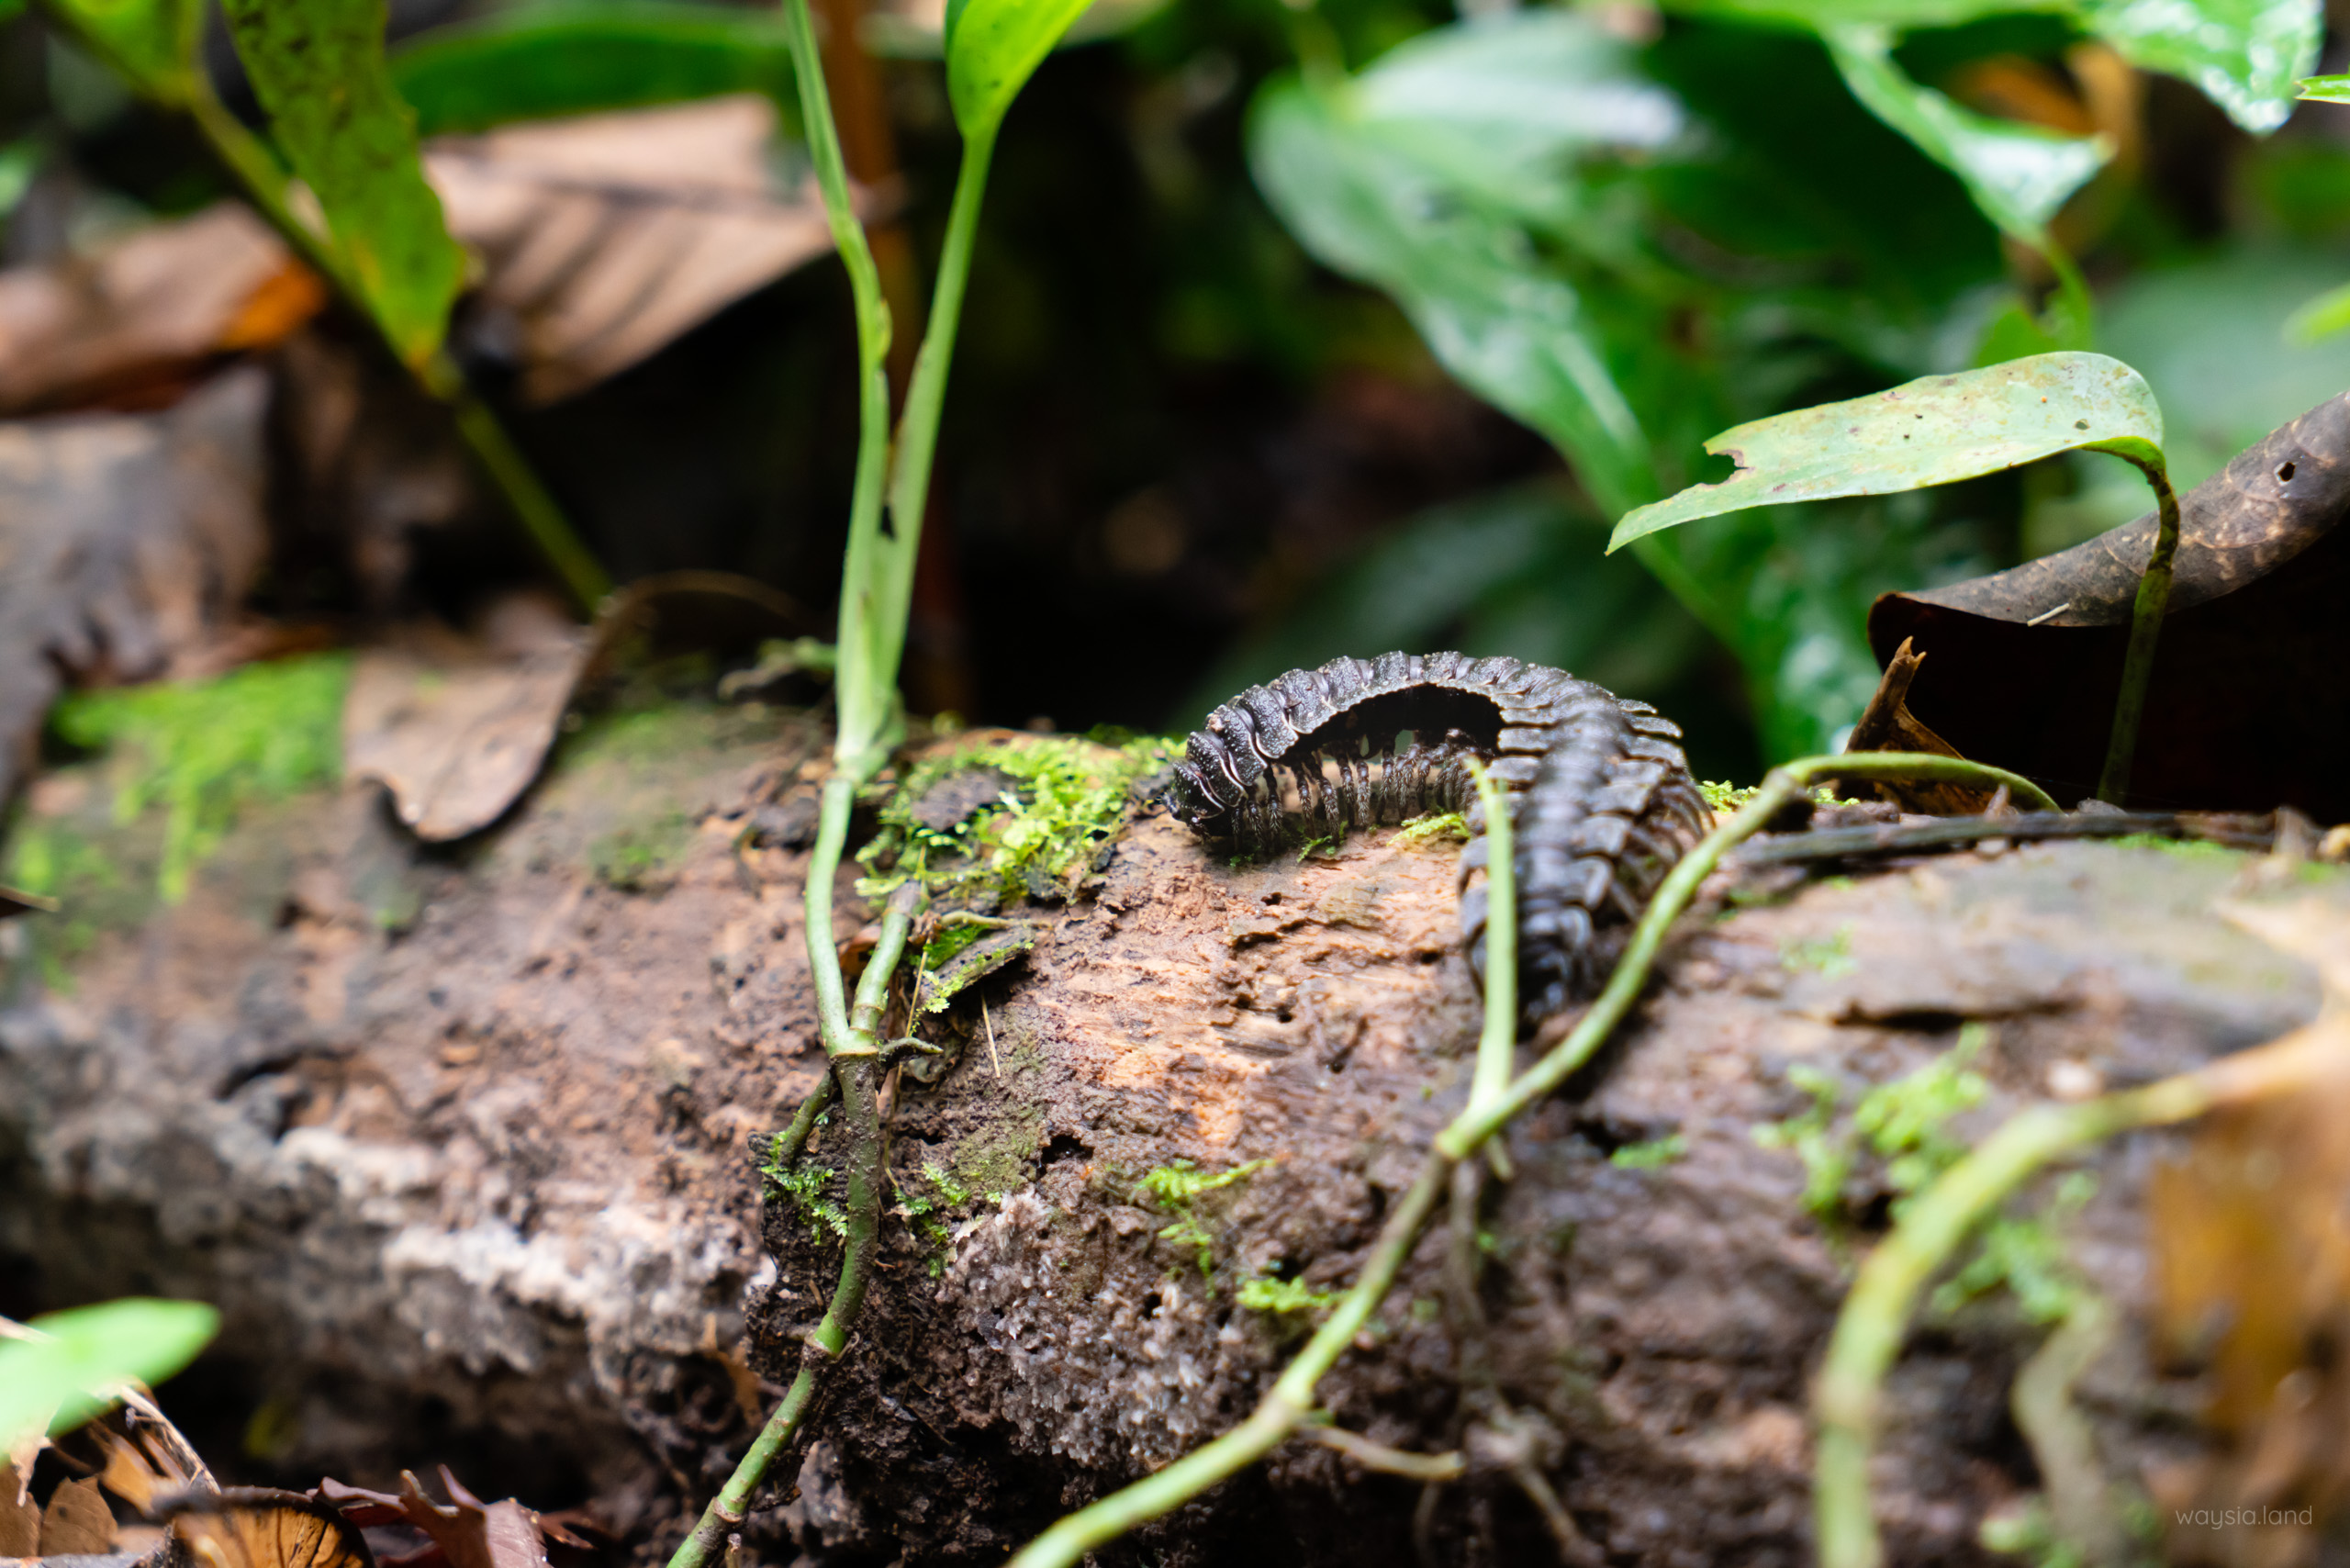 And you thought millipedes were scary